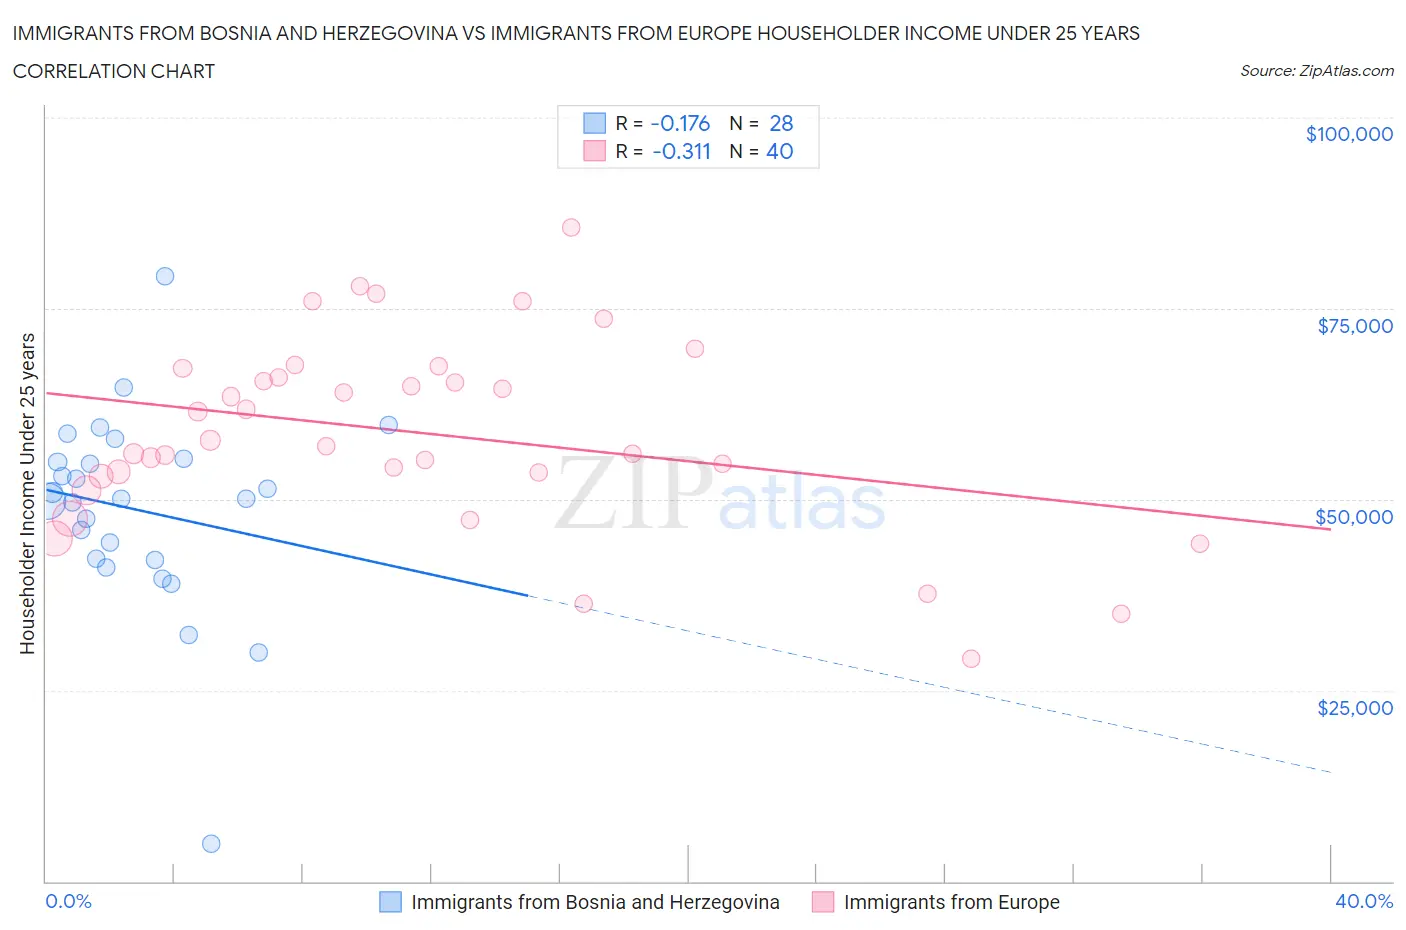 Immigrants from Bosnia and Herzegovina vs Immigrants from Europe Householder Income Under 25 years